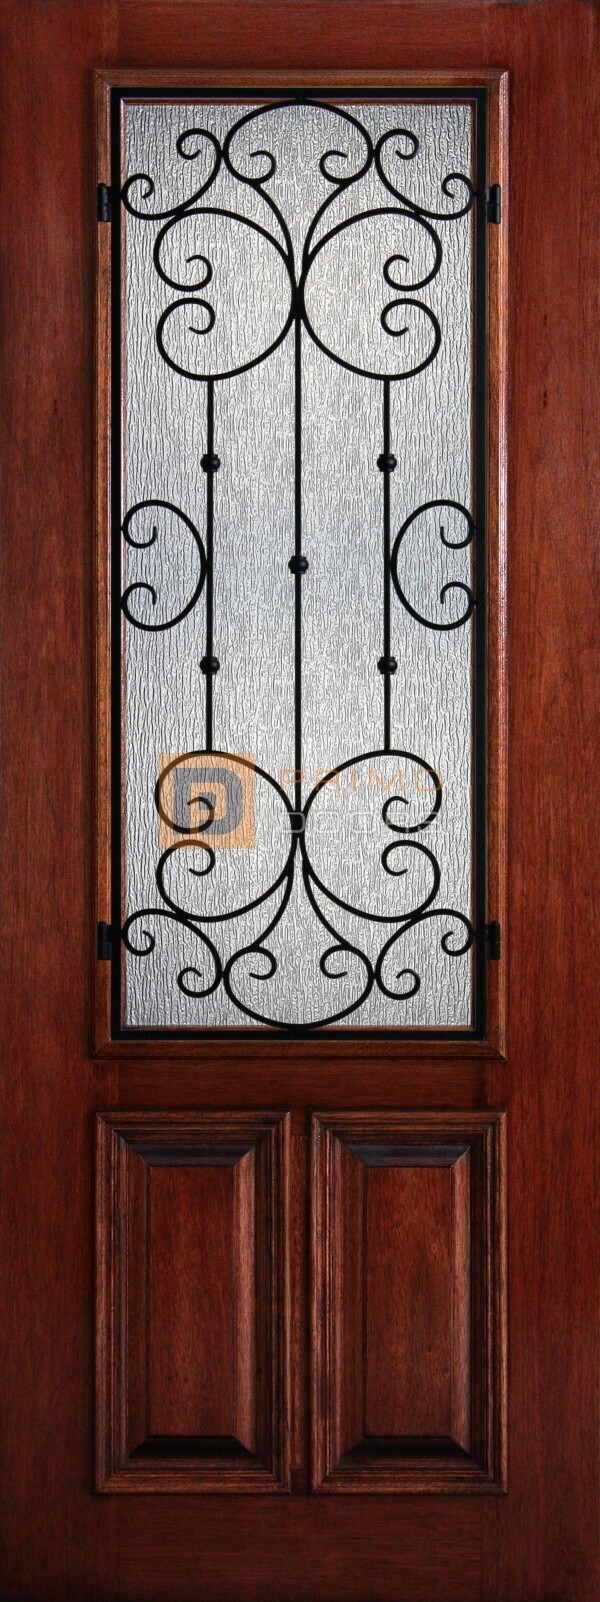 8′ 2/3 Lite Decorative Glass with Iron Grill - Mahogany Single Front Door – PD 3080-23 SANT